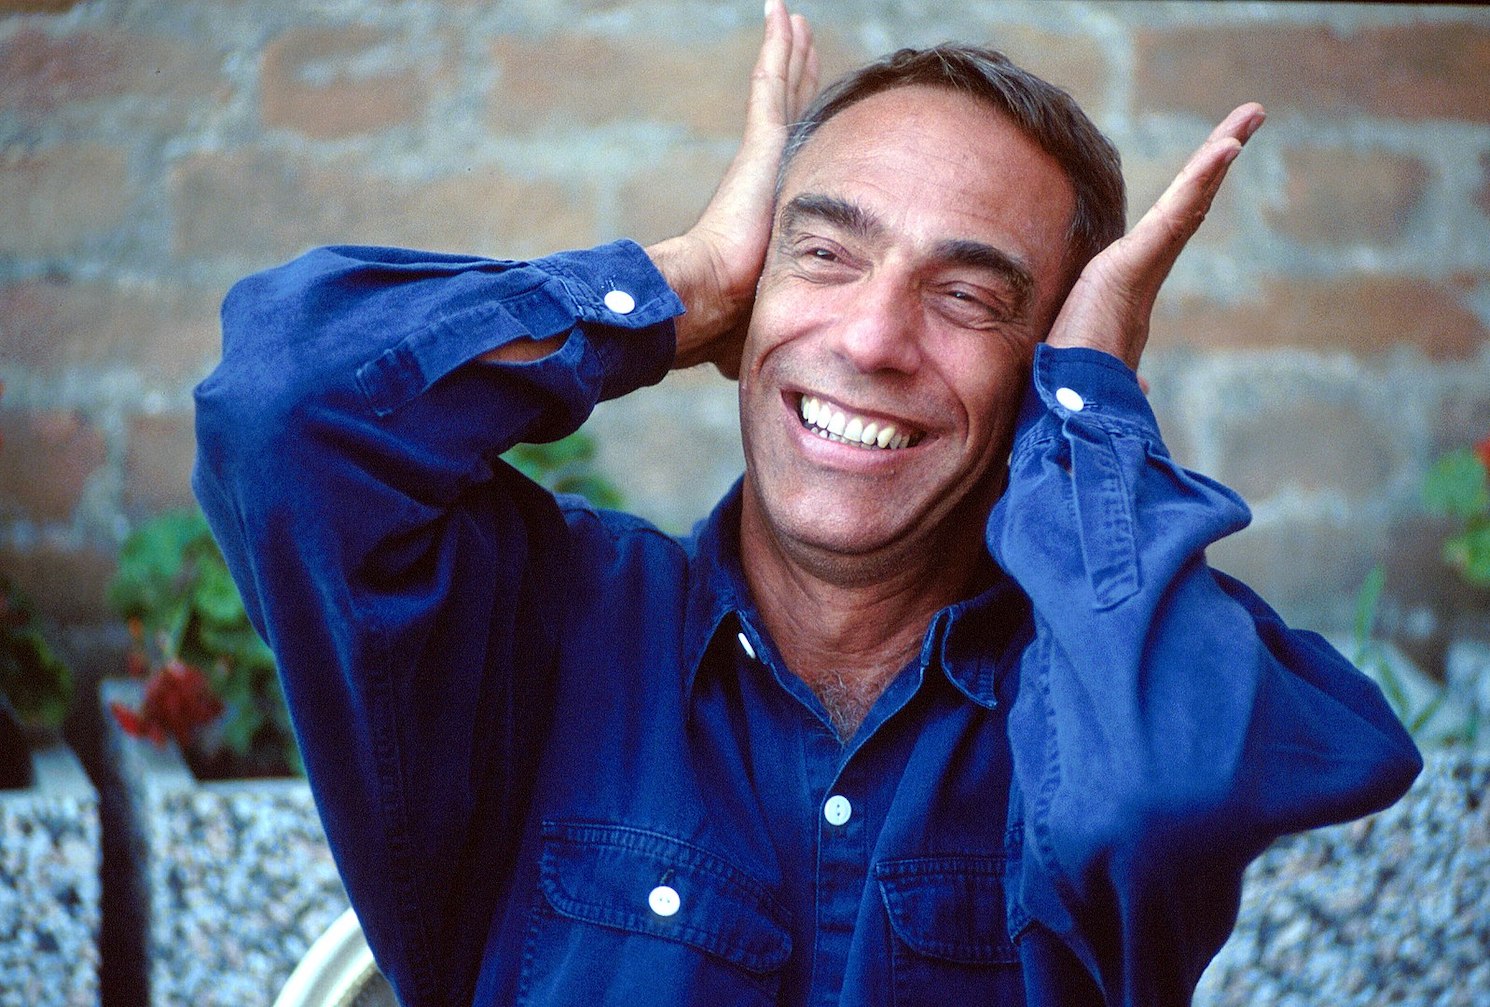 Film director Derek Jarman pictured sitting outdoors at the Venice Film Festival in 1991, wearing a blue button-up shirt. He is smiling and holding up the palms of his hands against the sides of his head.